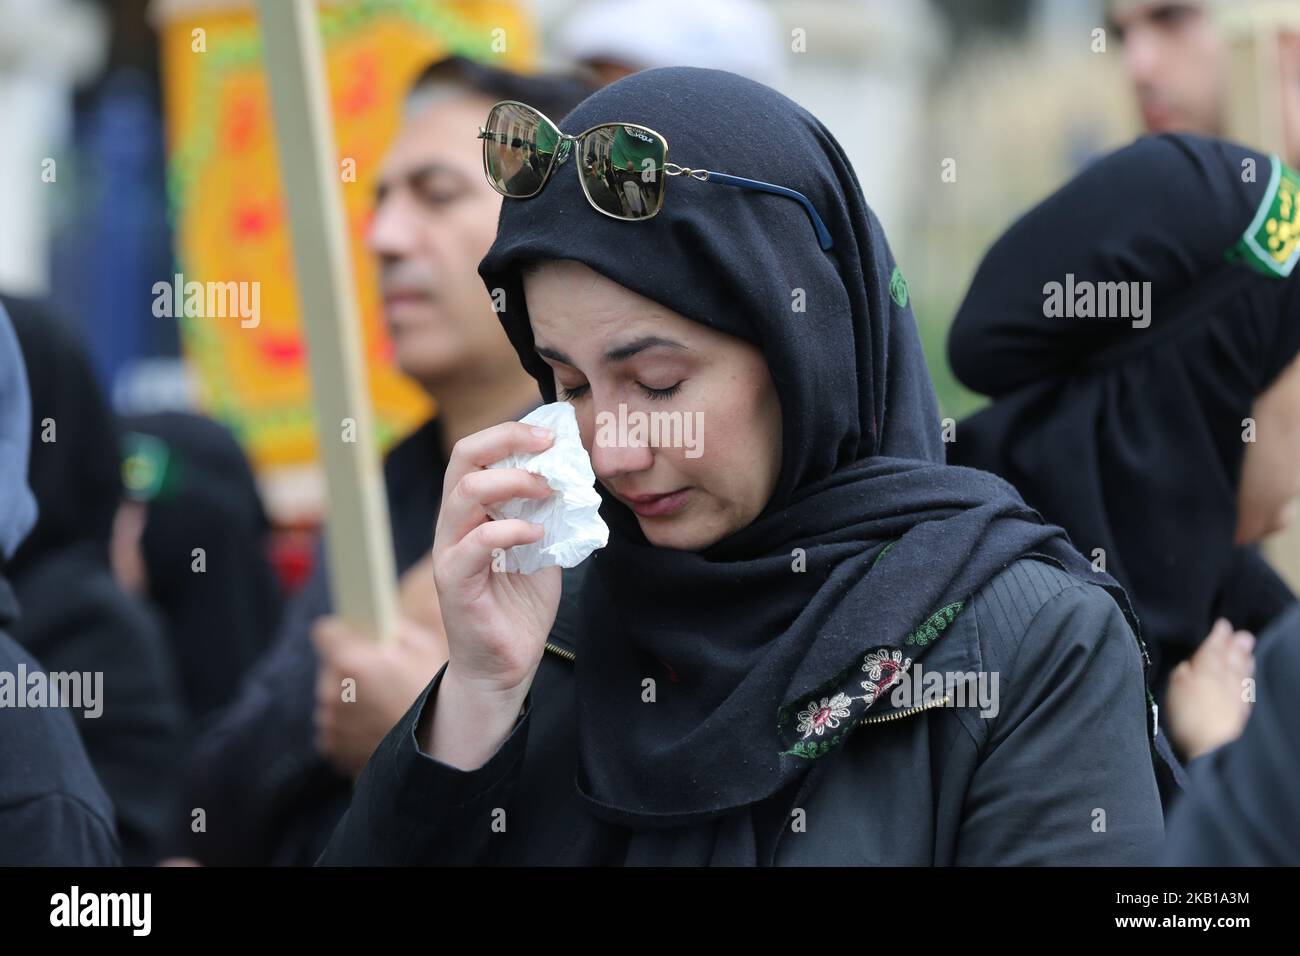 Woman crying as Shiite Muslim mourners take part in a Muharram procession in Toronto, Ontario, Canada, on September 20, 2018. Hundreds of Shiite Muslims took to the streets to commemorate the death of the third Imam, Hussein, slain along with 72 of his comrades in a battle against the army of the seventh-century caliph Yazid. In keeping with the military nature of these Ashura processions, mourners simulate self-flagellation and pound on their chests to the thump of a bass drum and the crackle of a snare. (Photo by Creative Touch Imaging Ltd./NurPhoto) Stock Photo